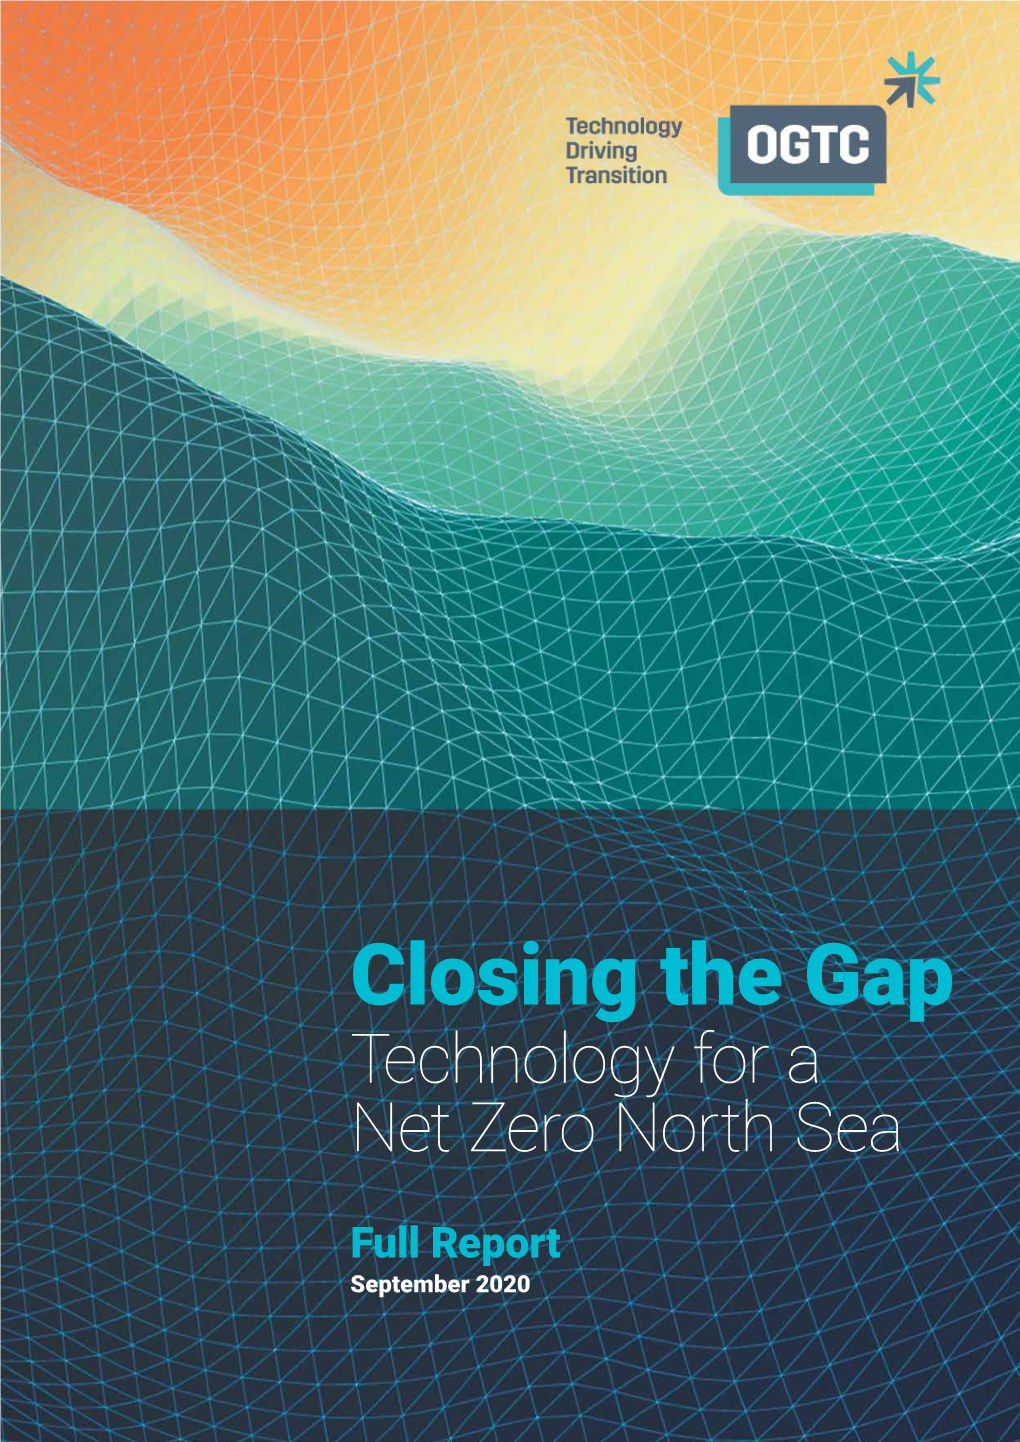 The Closing the Gap Report